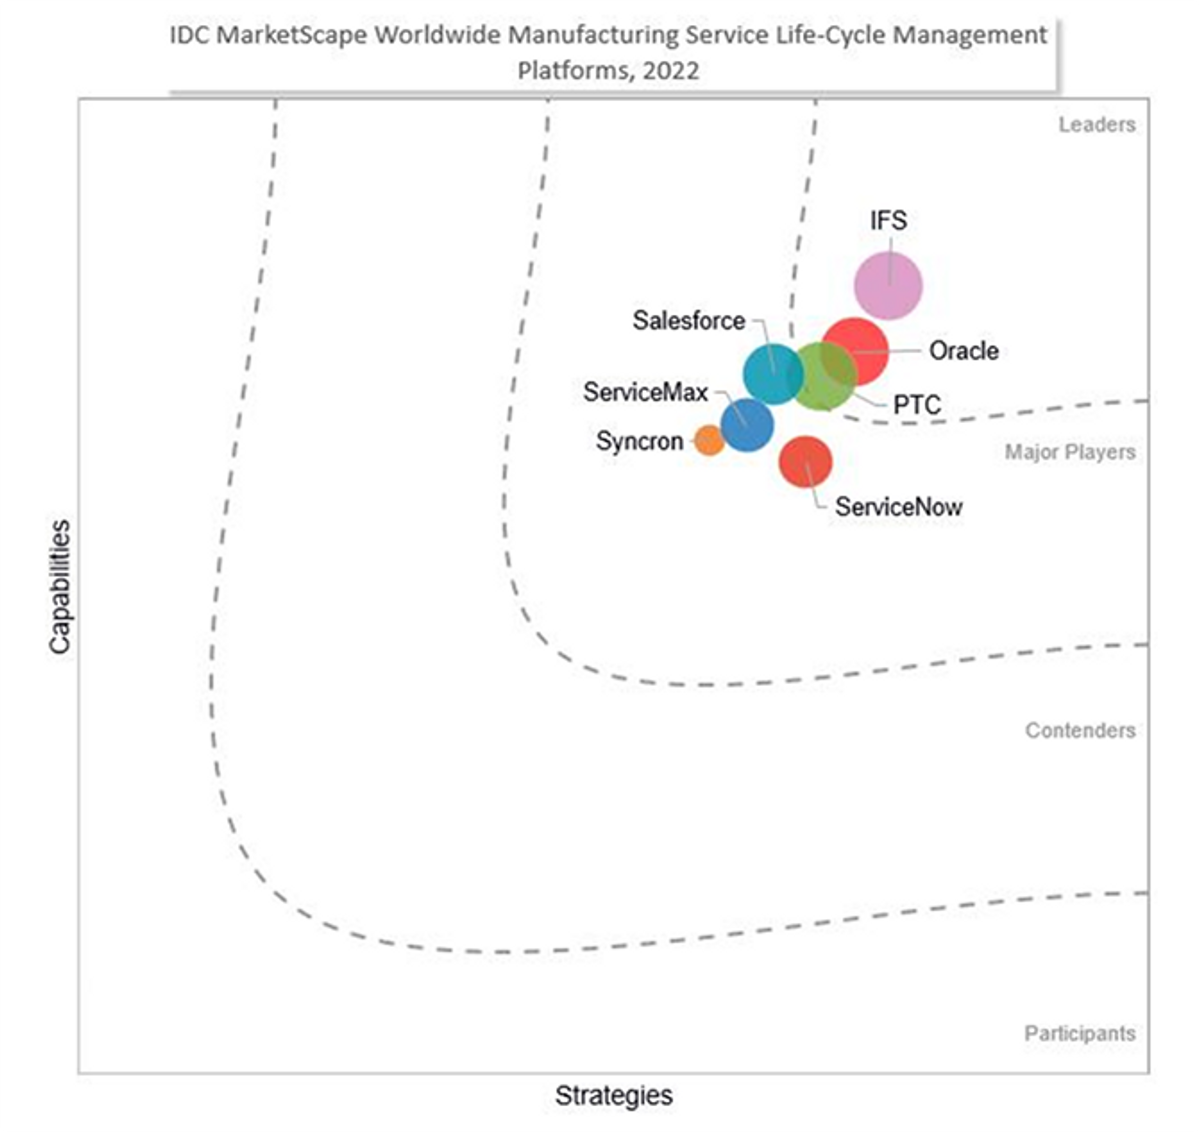 IFS positioned as a Leader in IDC MarketScape for Worldwide Manufacturing Service Life-Cycle Management